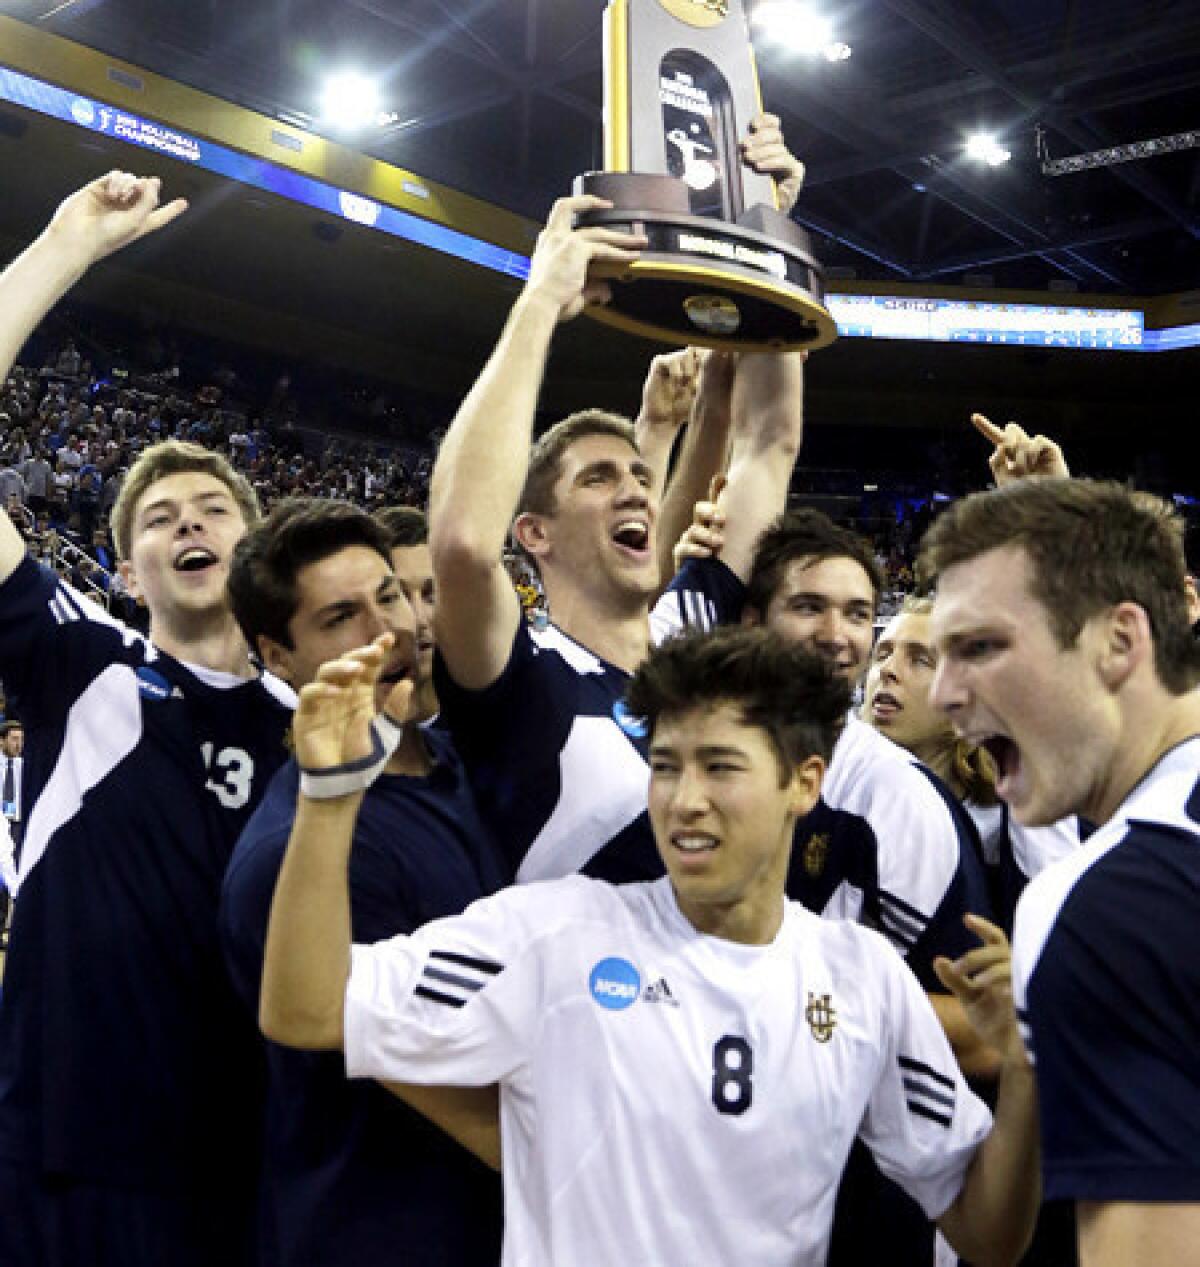 UC Irvine players hold the championship trophy as they celebrate their victory over Brigham Young in the NCAA men's volleyball tournament final on Saturday at Pauley Pavilion.